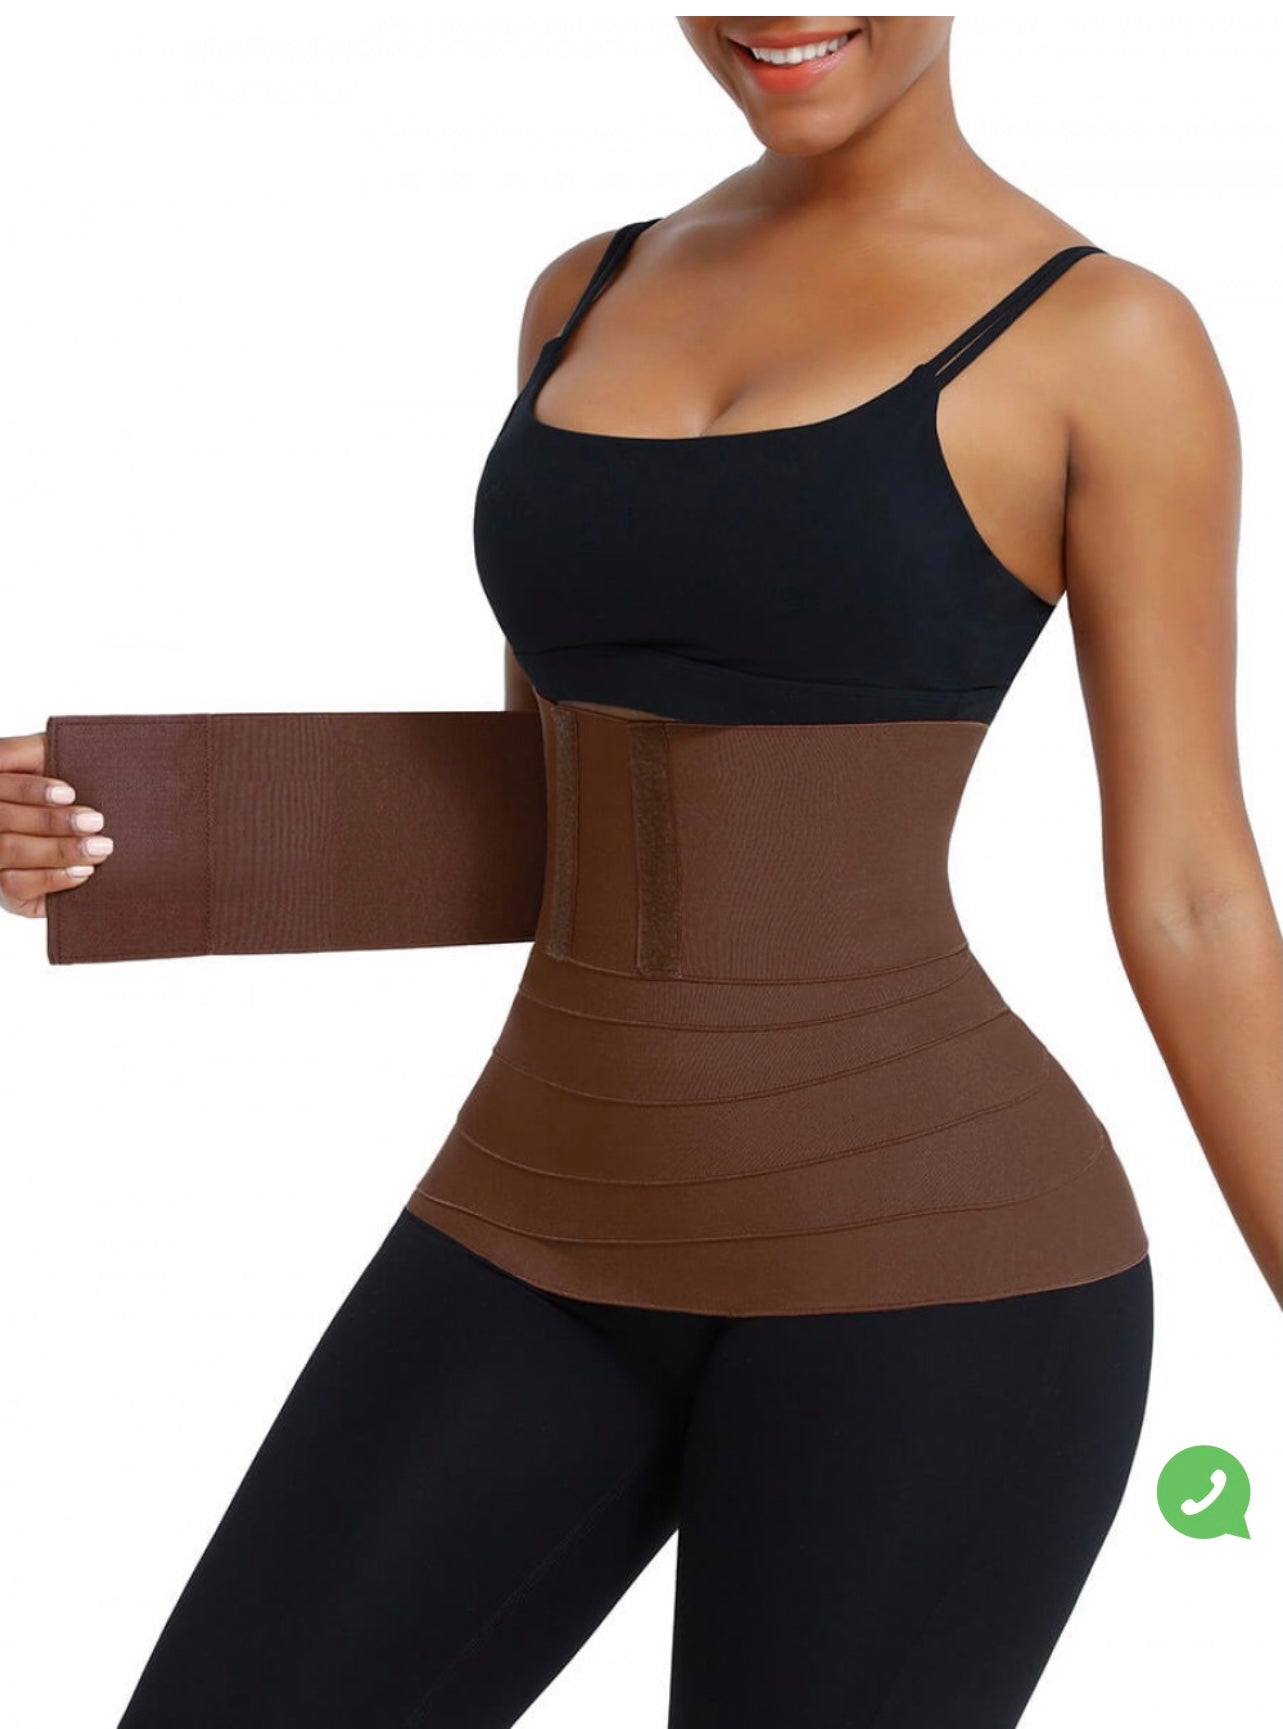 easywrap waist trainer/ one size fit all brown